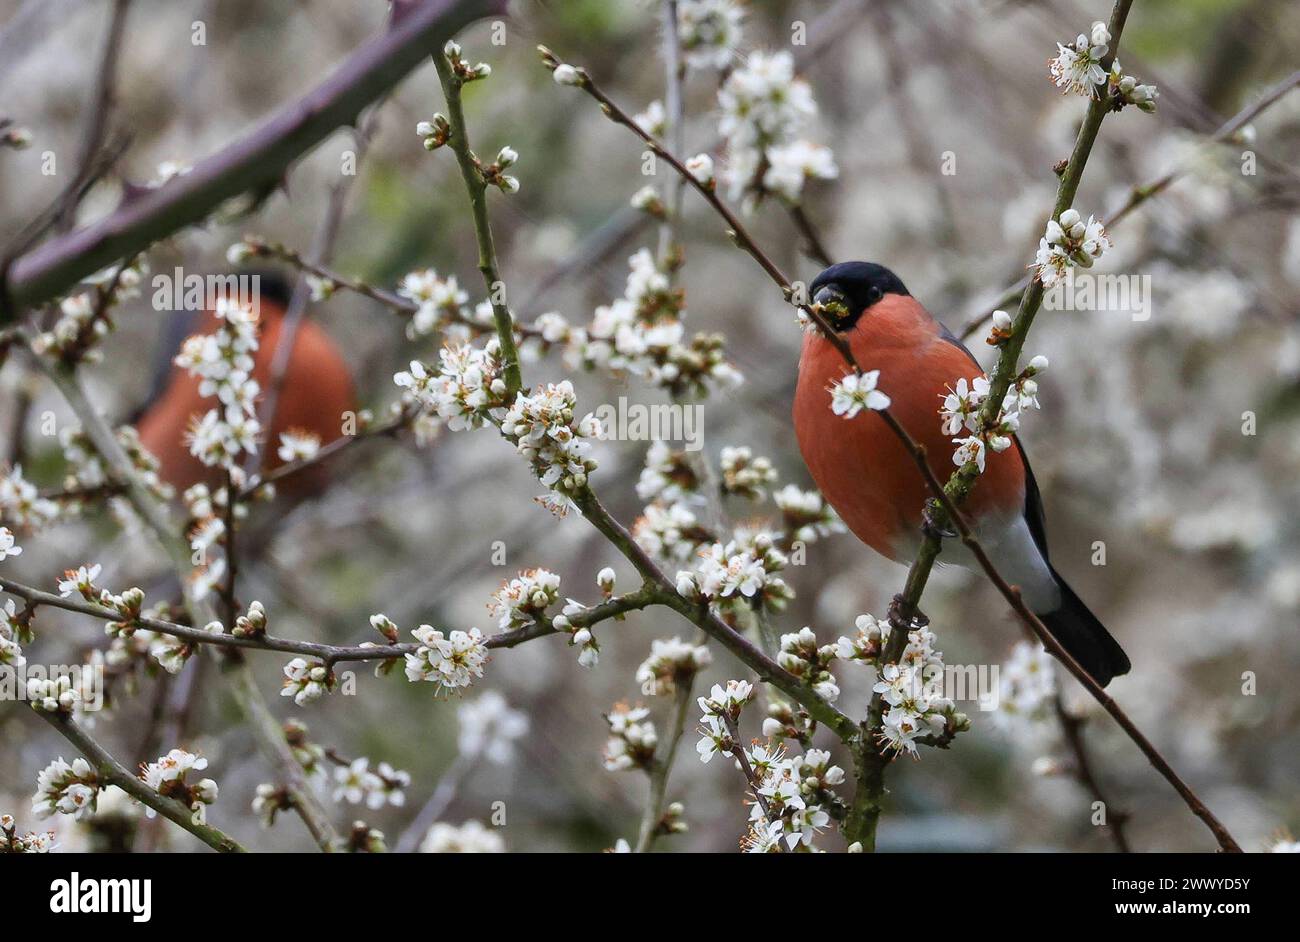 Kinnego, Lough Neagh, County Armagh, Northern Ireland, UK. 26th Mar 2024. UK weather - a drab grey and damp spring day in a cold easterly wind at Lough Neagh. A male bullfinch foraging in fresh spring white blossom. Credit: CAZIMB/Alamy Live News.. Stock Photo